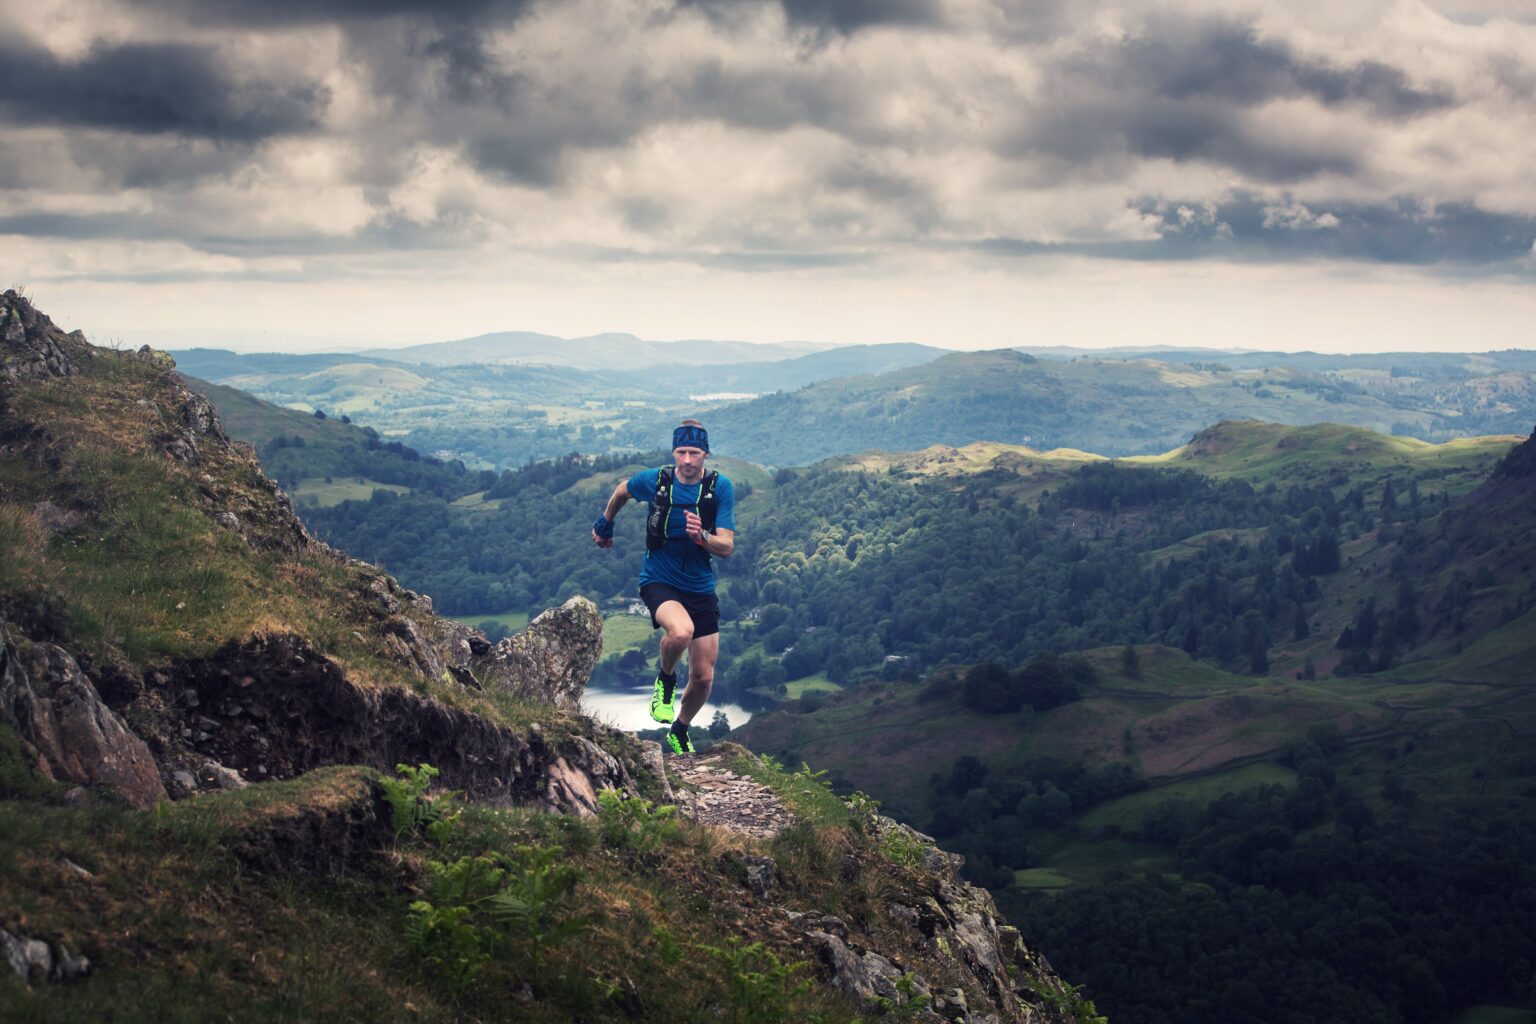 Trail runner Damian Hall running along the side of a mountain with vast mountain landscape in the background